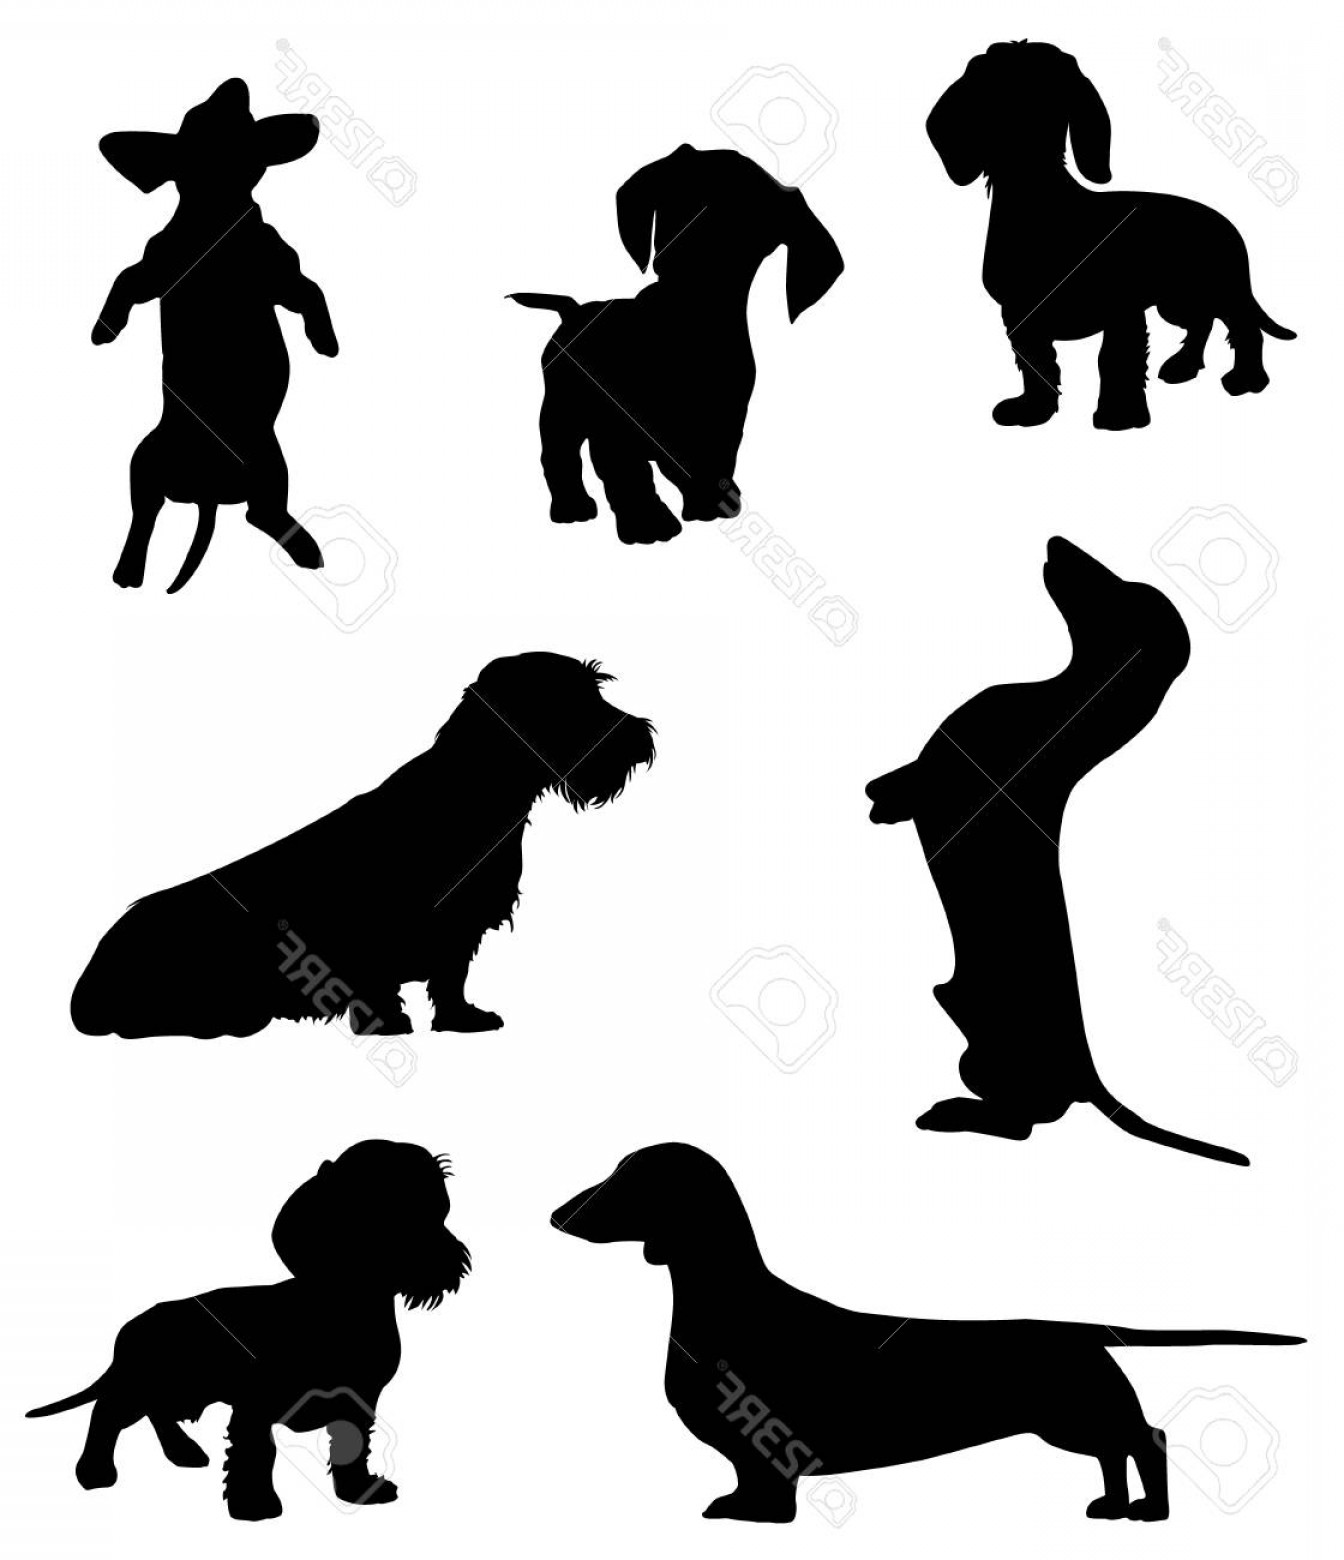 dachshund-silhouette-vector-at-vectorified-collection-of